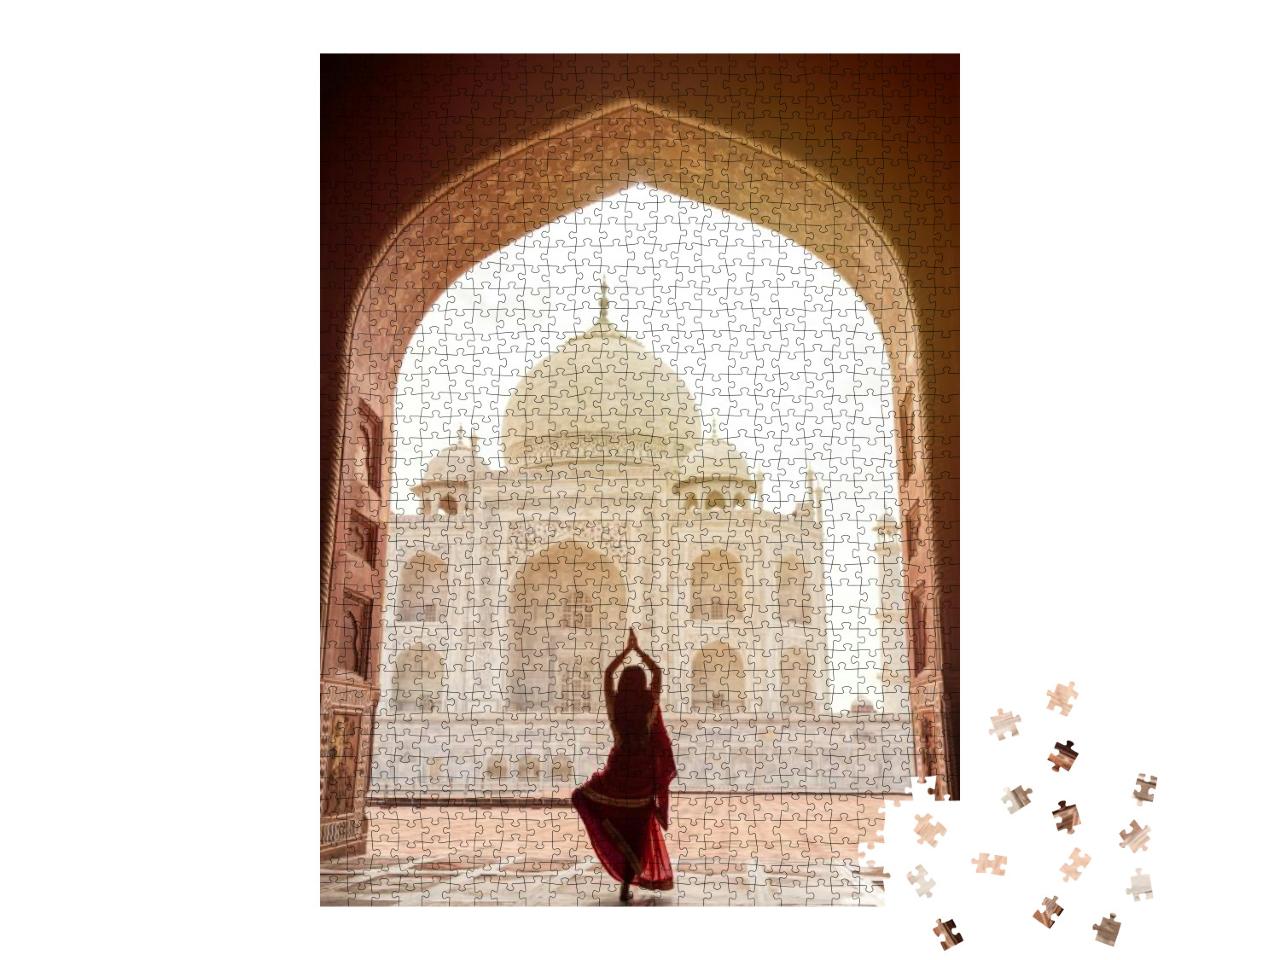 Indian Woman in Red Saree/Sari in the Taj Mahal, Agra, Ut... Jigsaw Puzzle with 1000 pieces